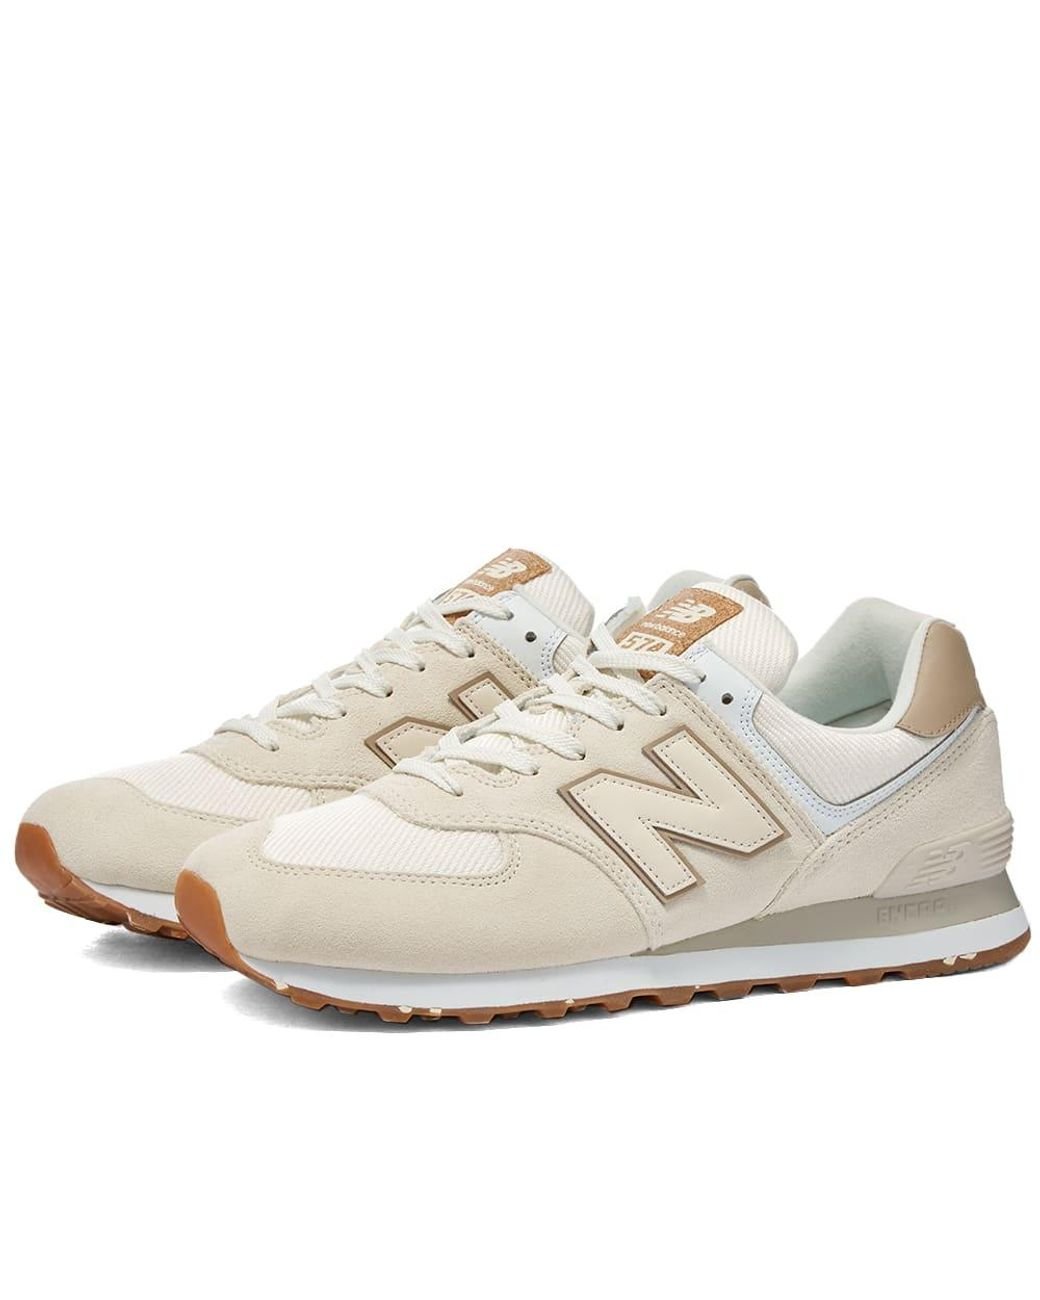 New Balance 574 / Tan Trainers in White Lyst